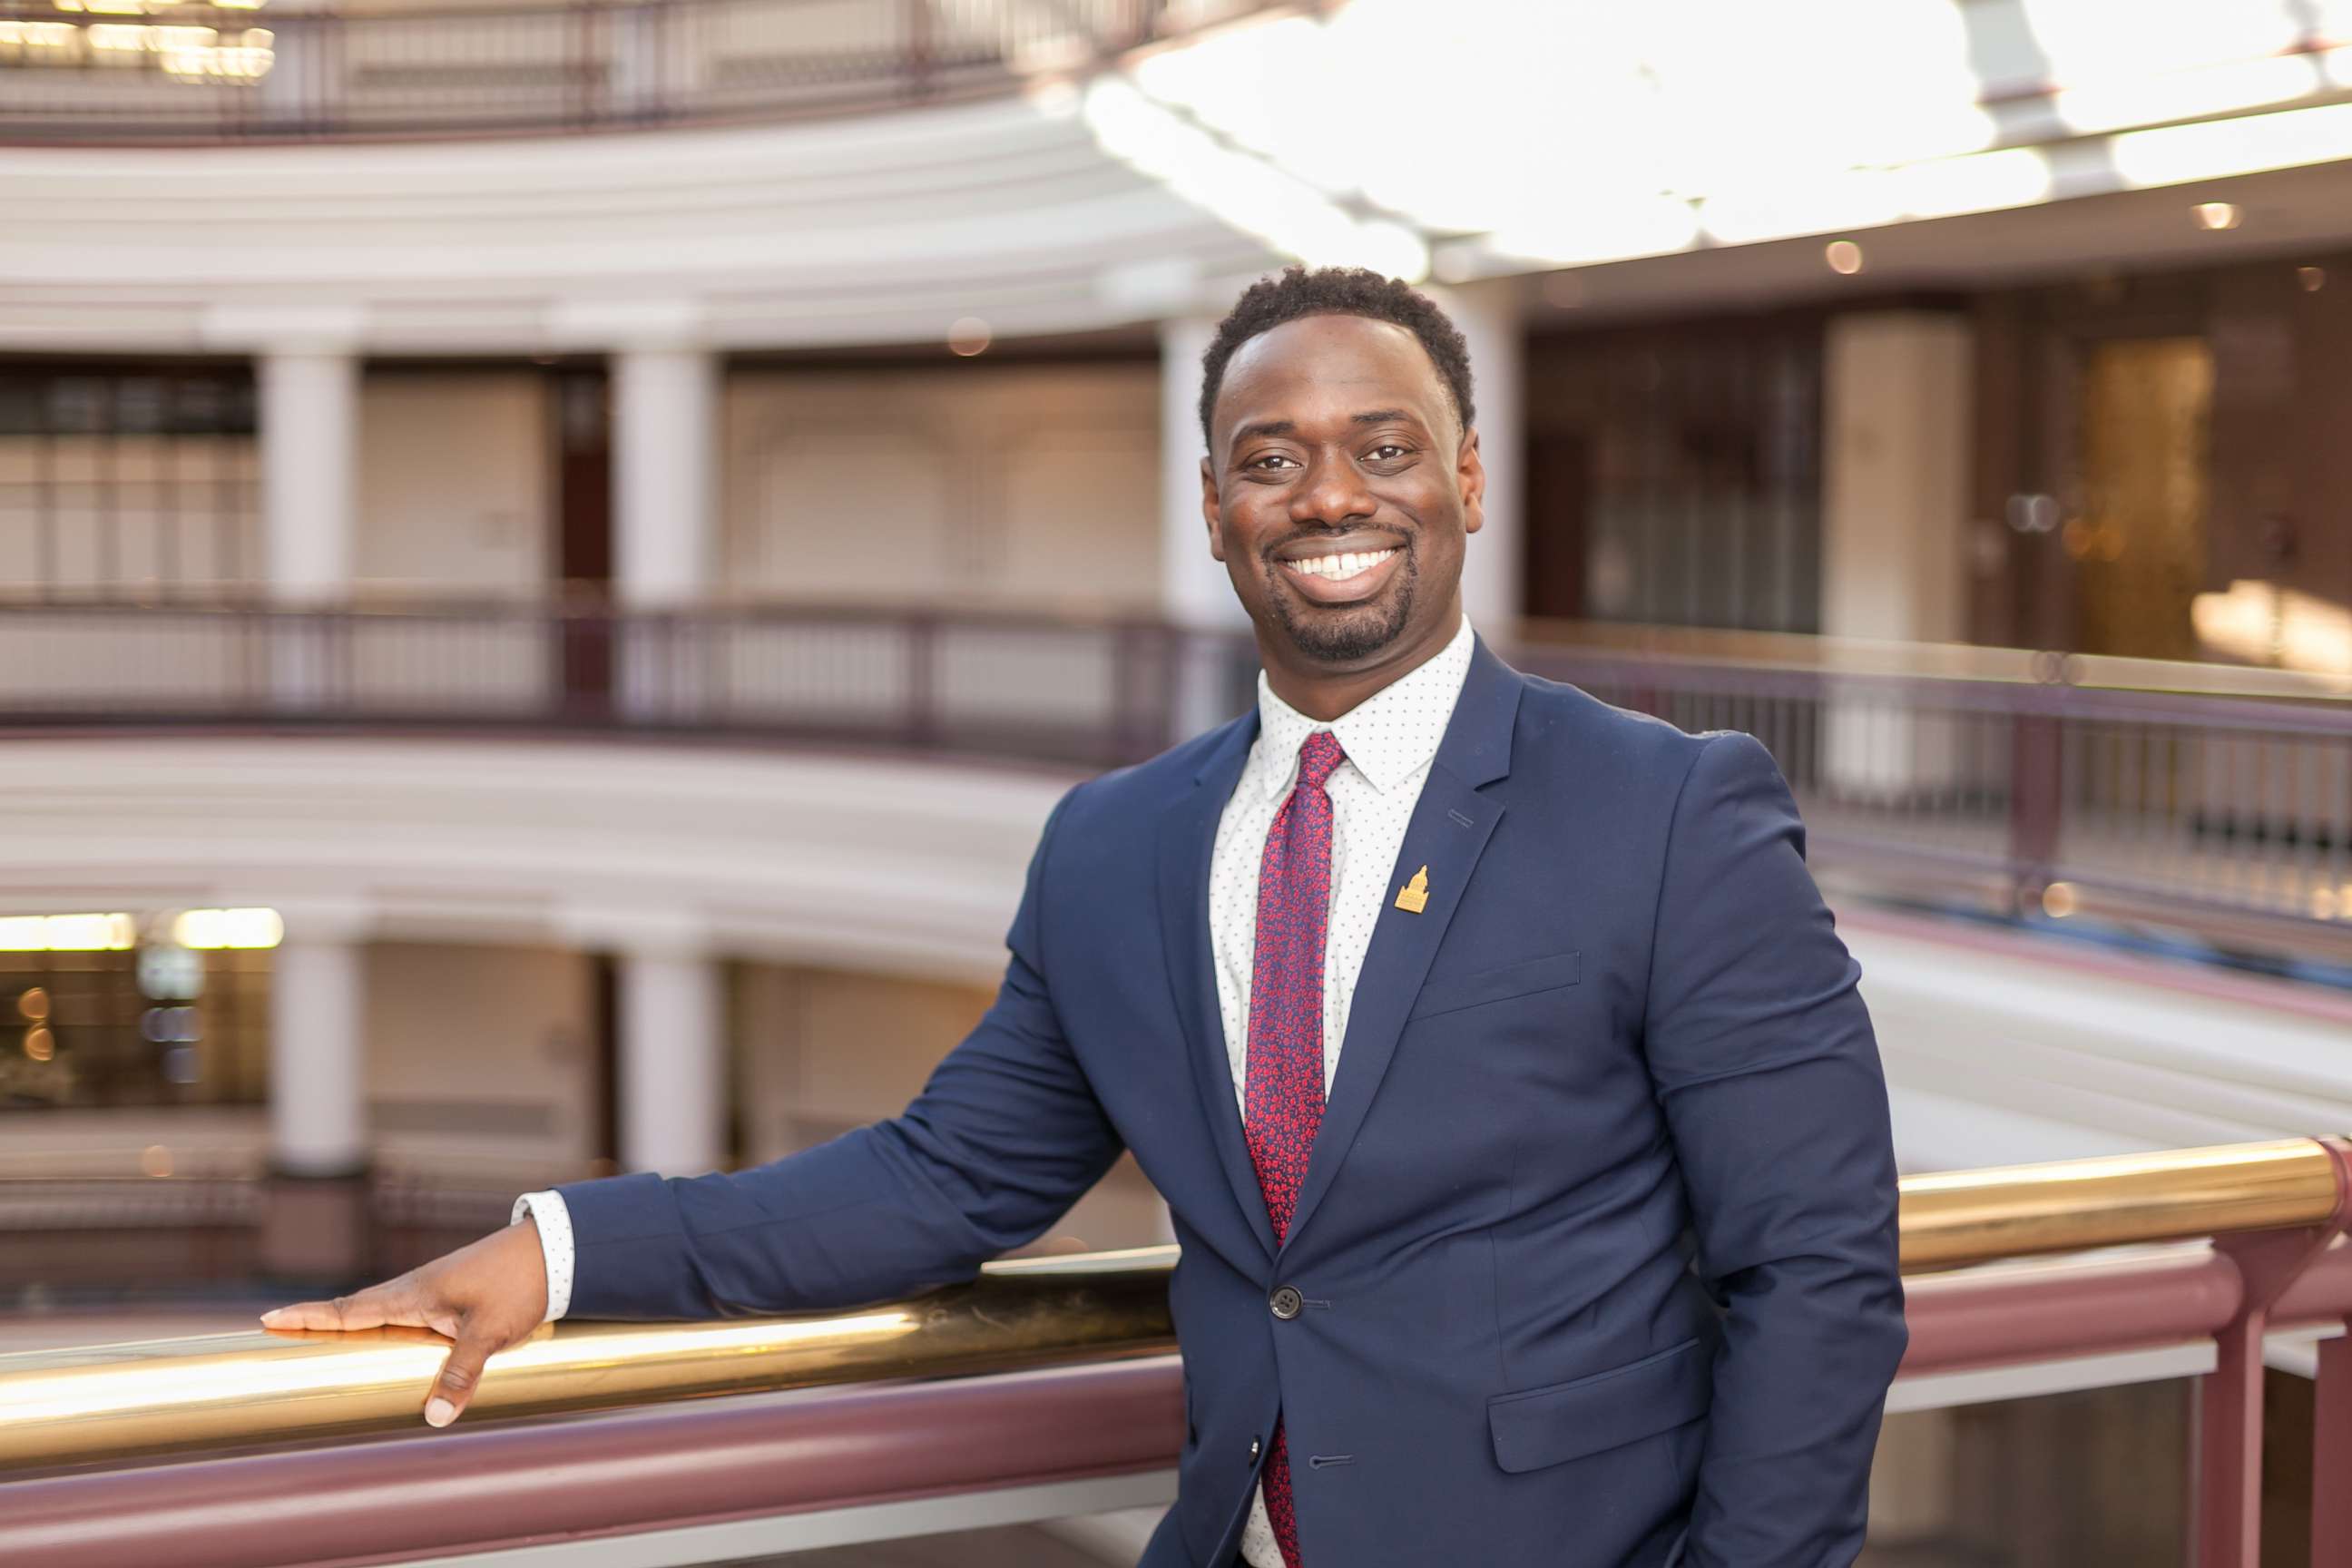 PHOTO: State Rep. Quentin Williams is seen in this undated image from the Connecticut House Democrats website.